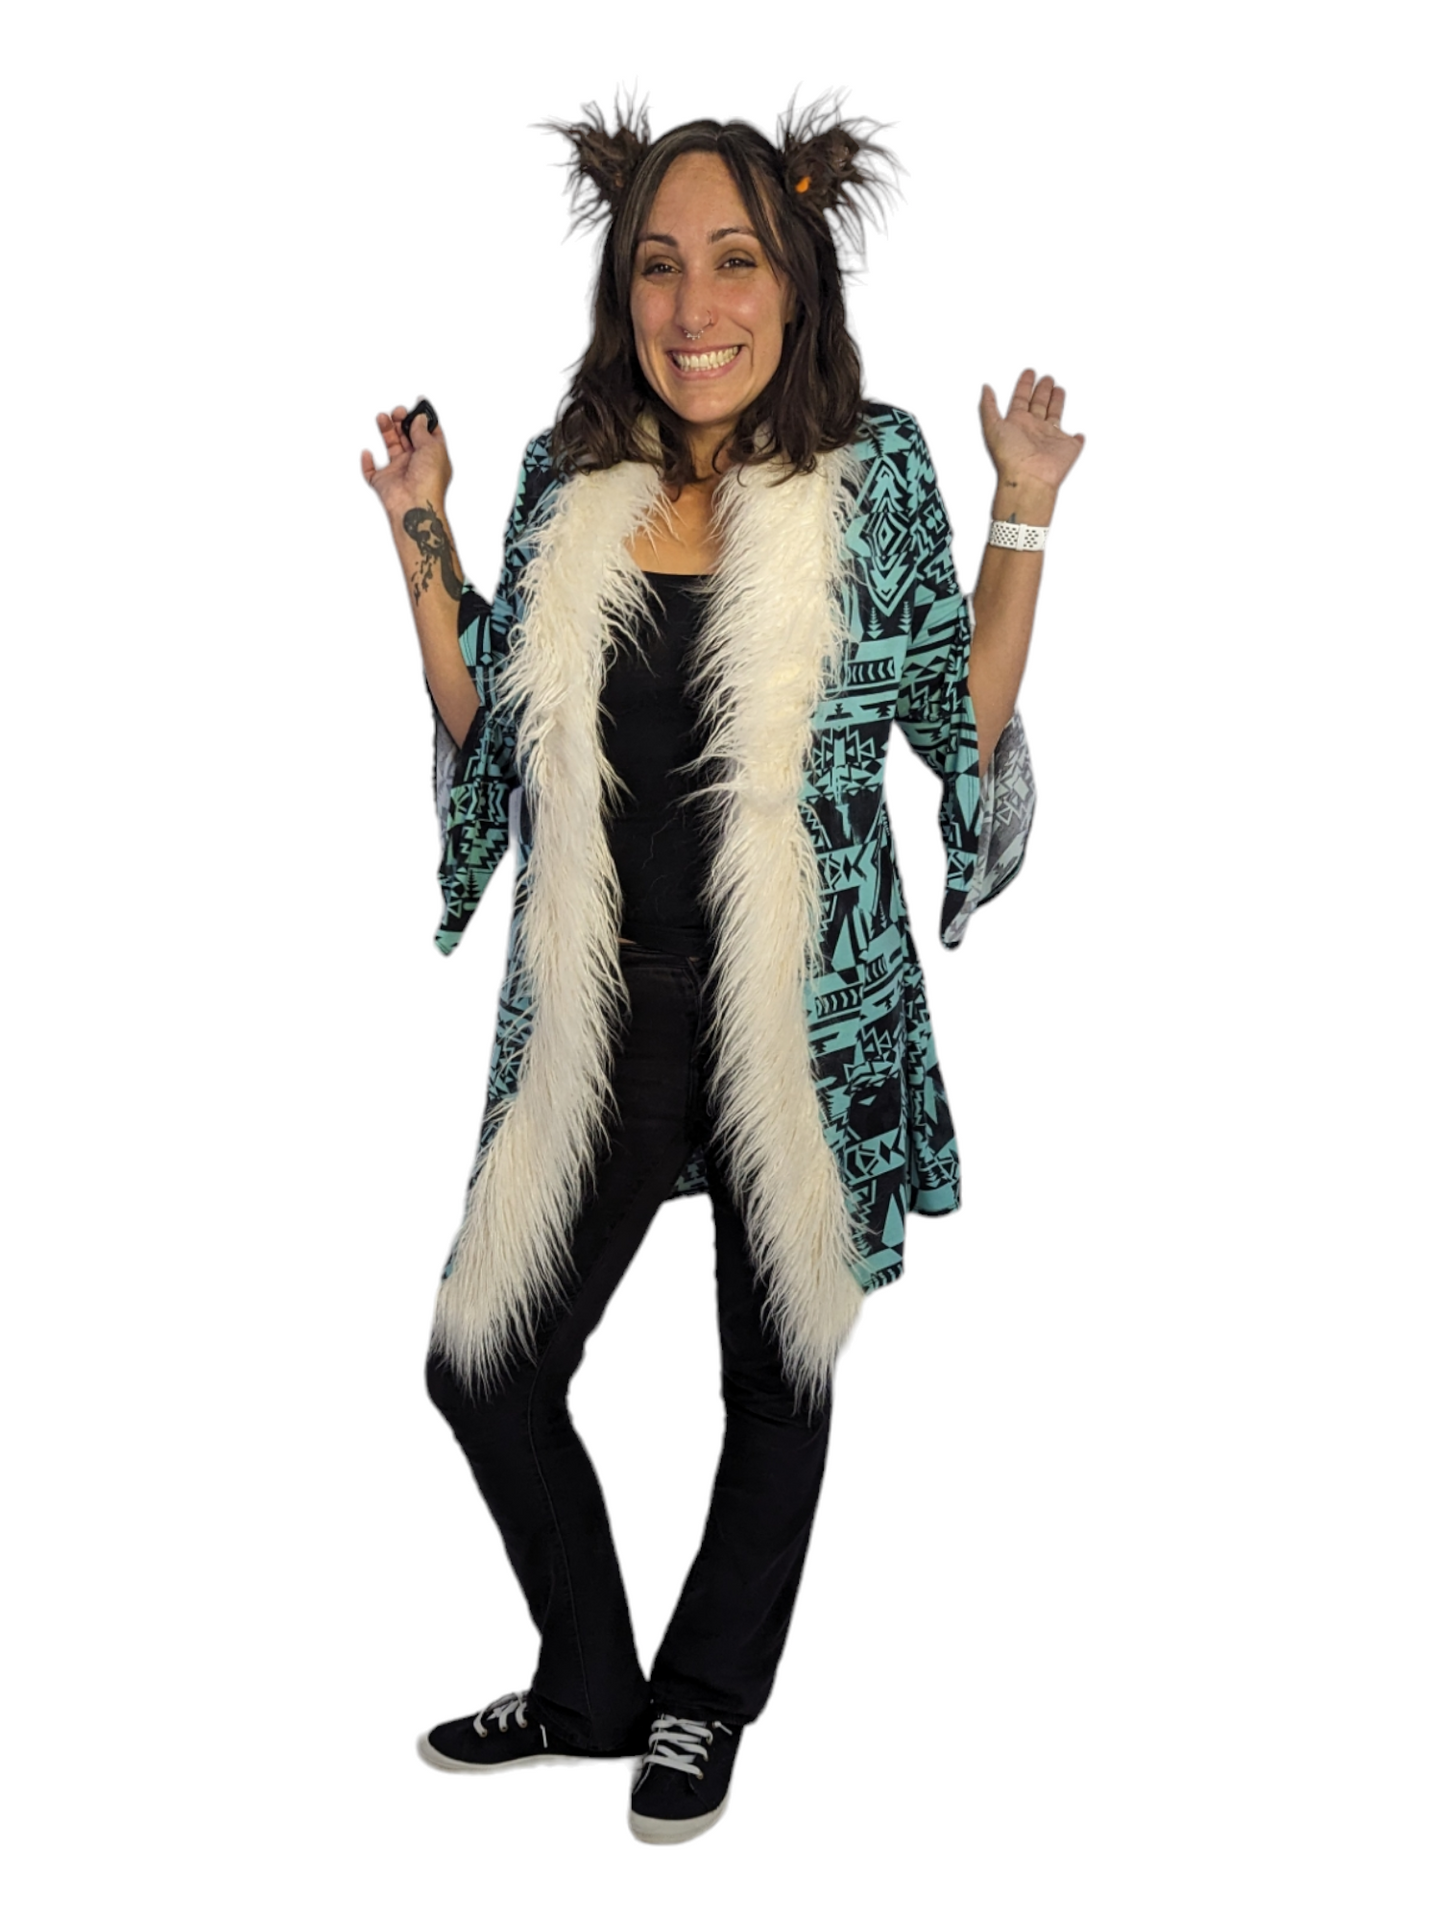 Front view of woman wearing fur lined jacket.